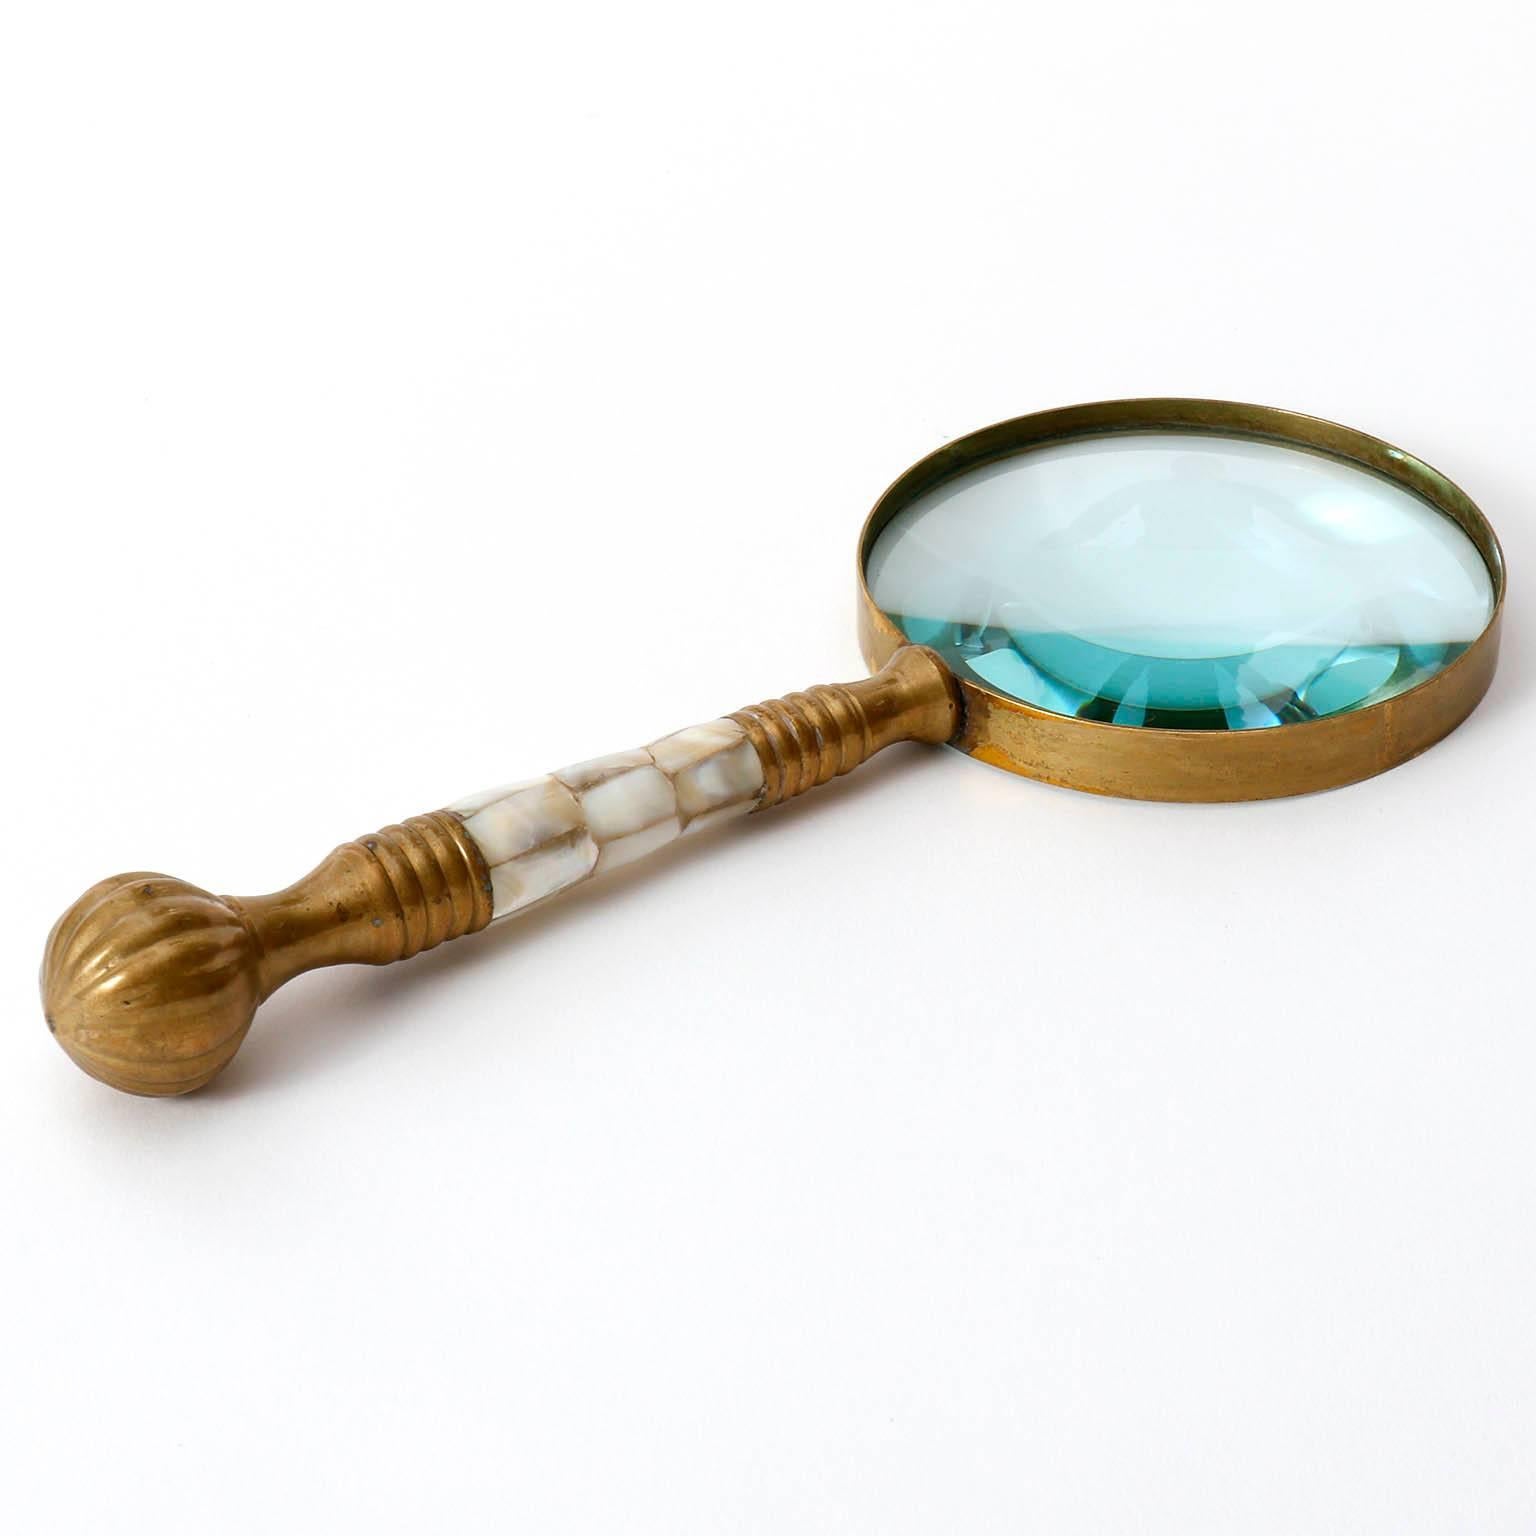 A magnifying glass made of brass, glass and mother-of-pearl. Very nice patina on brass.